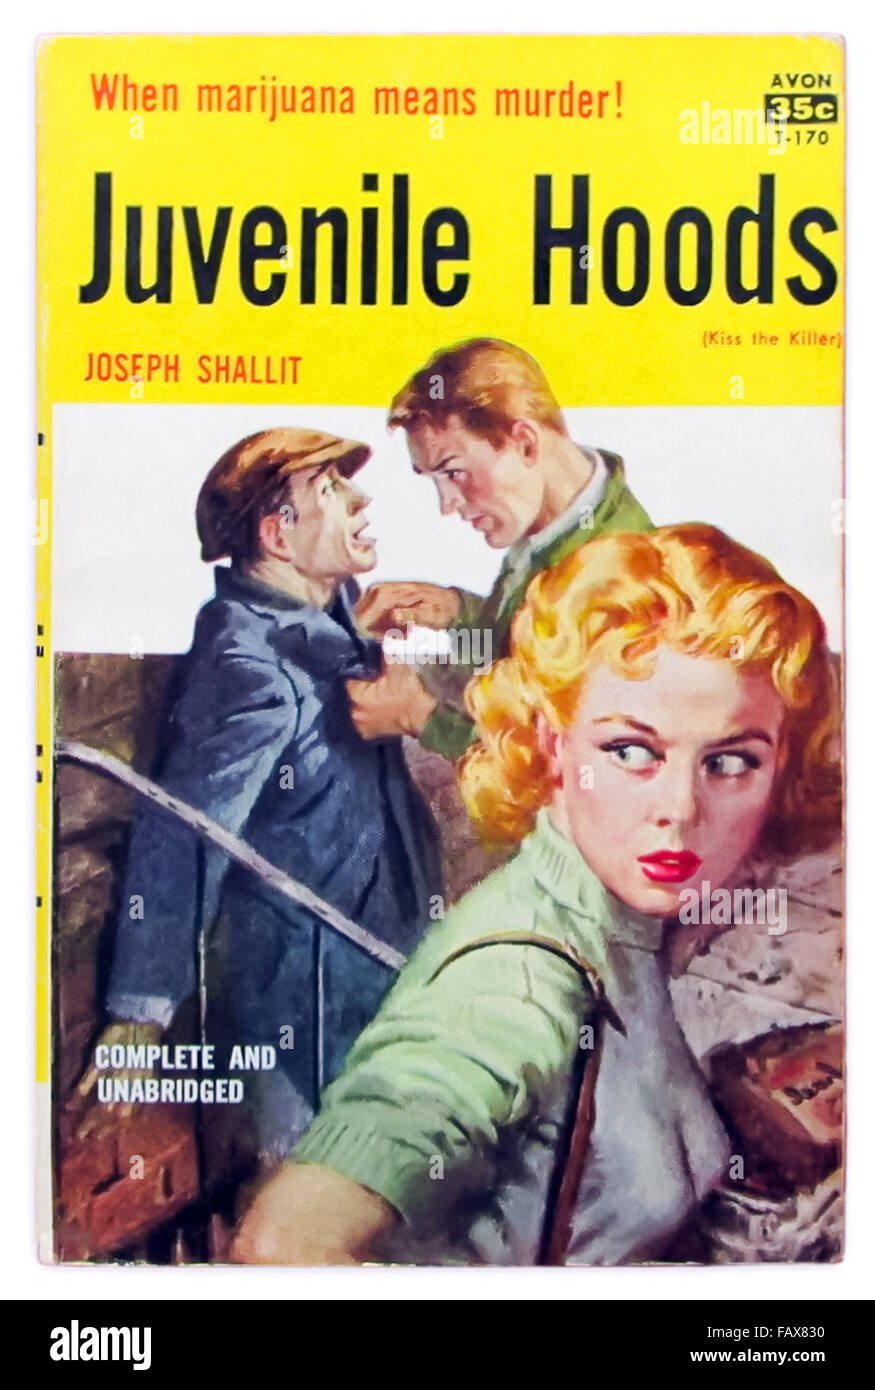 Front cover of 'Juvenile Hoods' by Joseph Shallit published by Avon (T-170) in 1957: 'When marijuana means murder!'. This was a reprint of a story entitled 'Kiss the Killer' first published in 1952 (528). See description for more information. Stock Photo